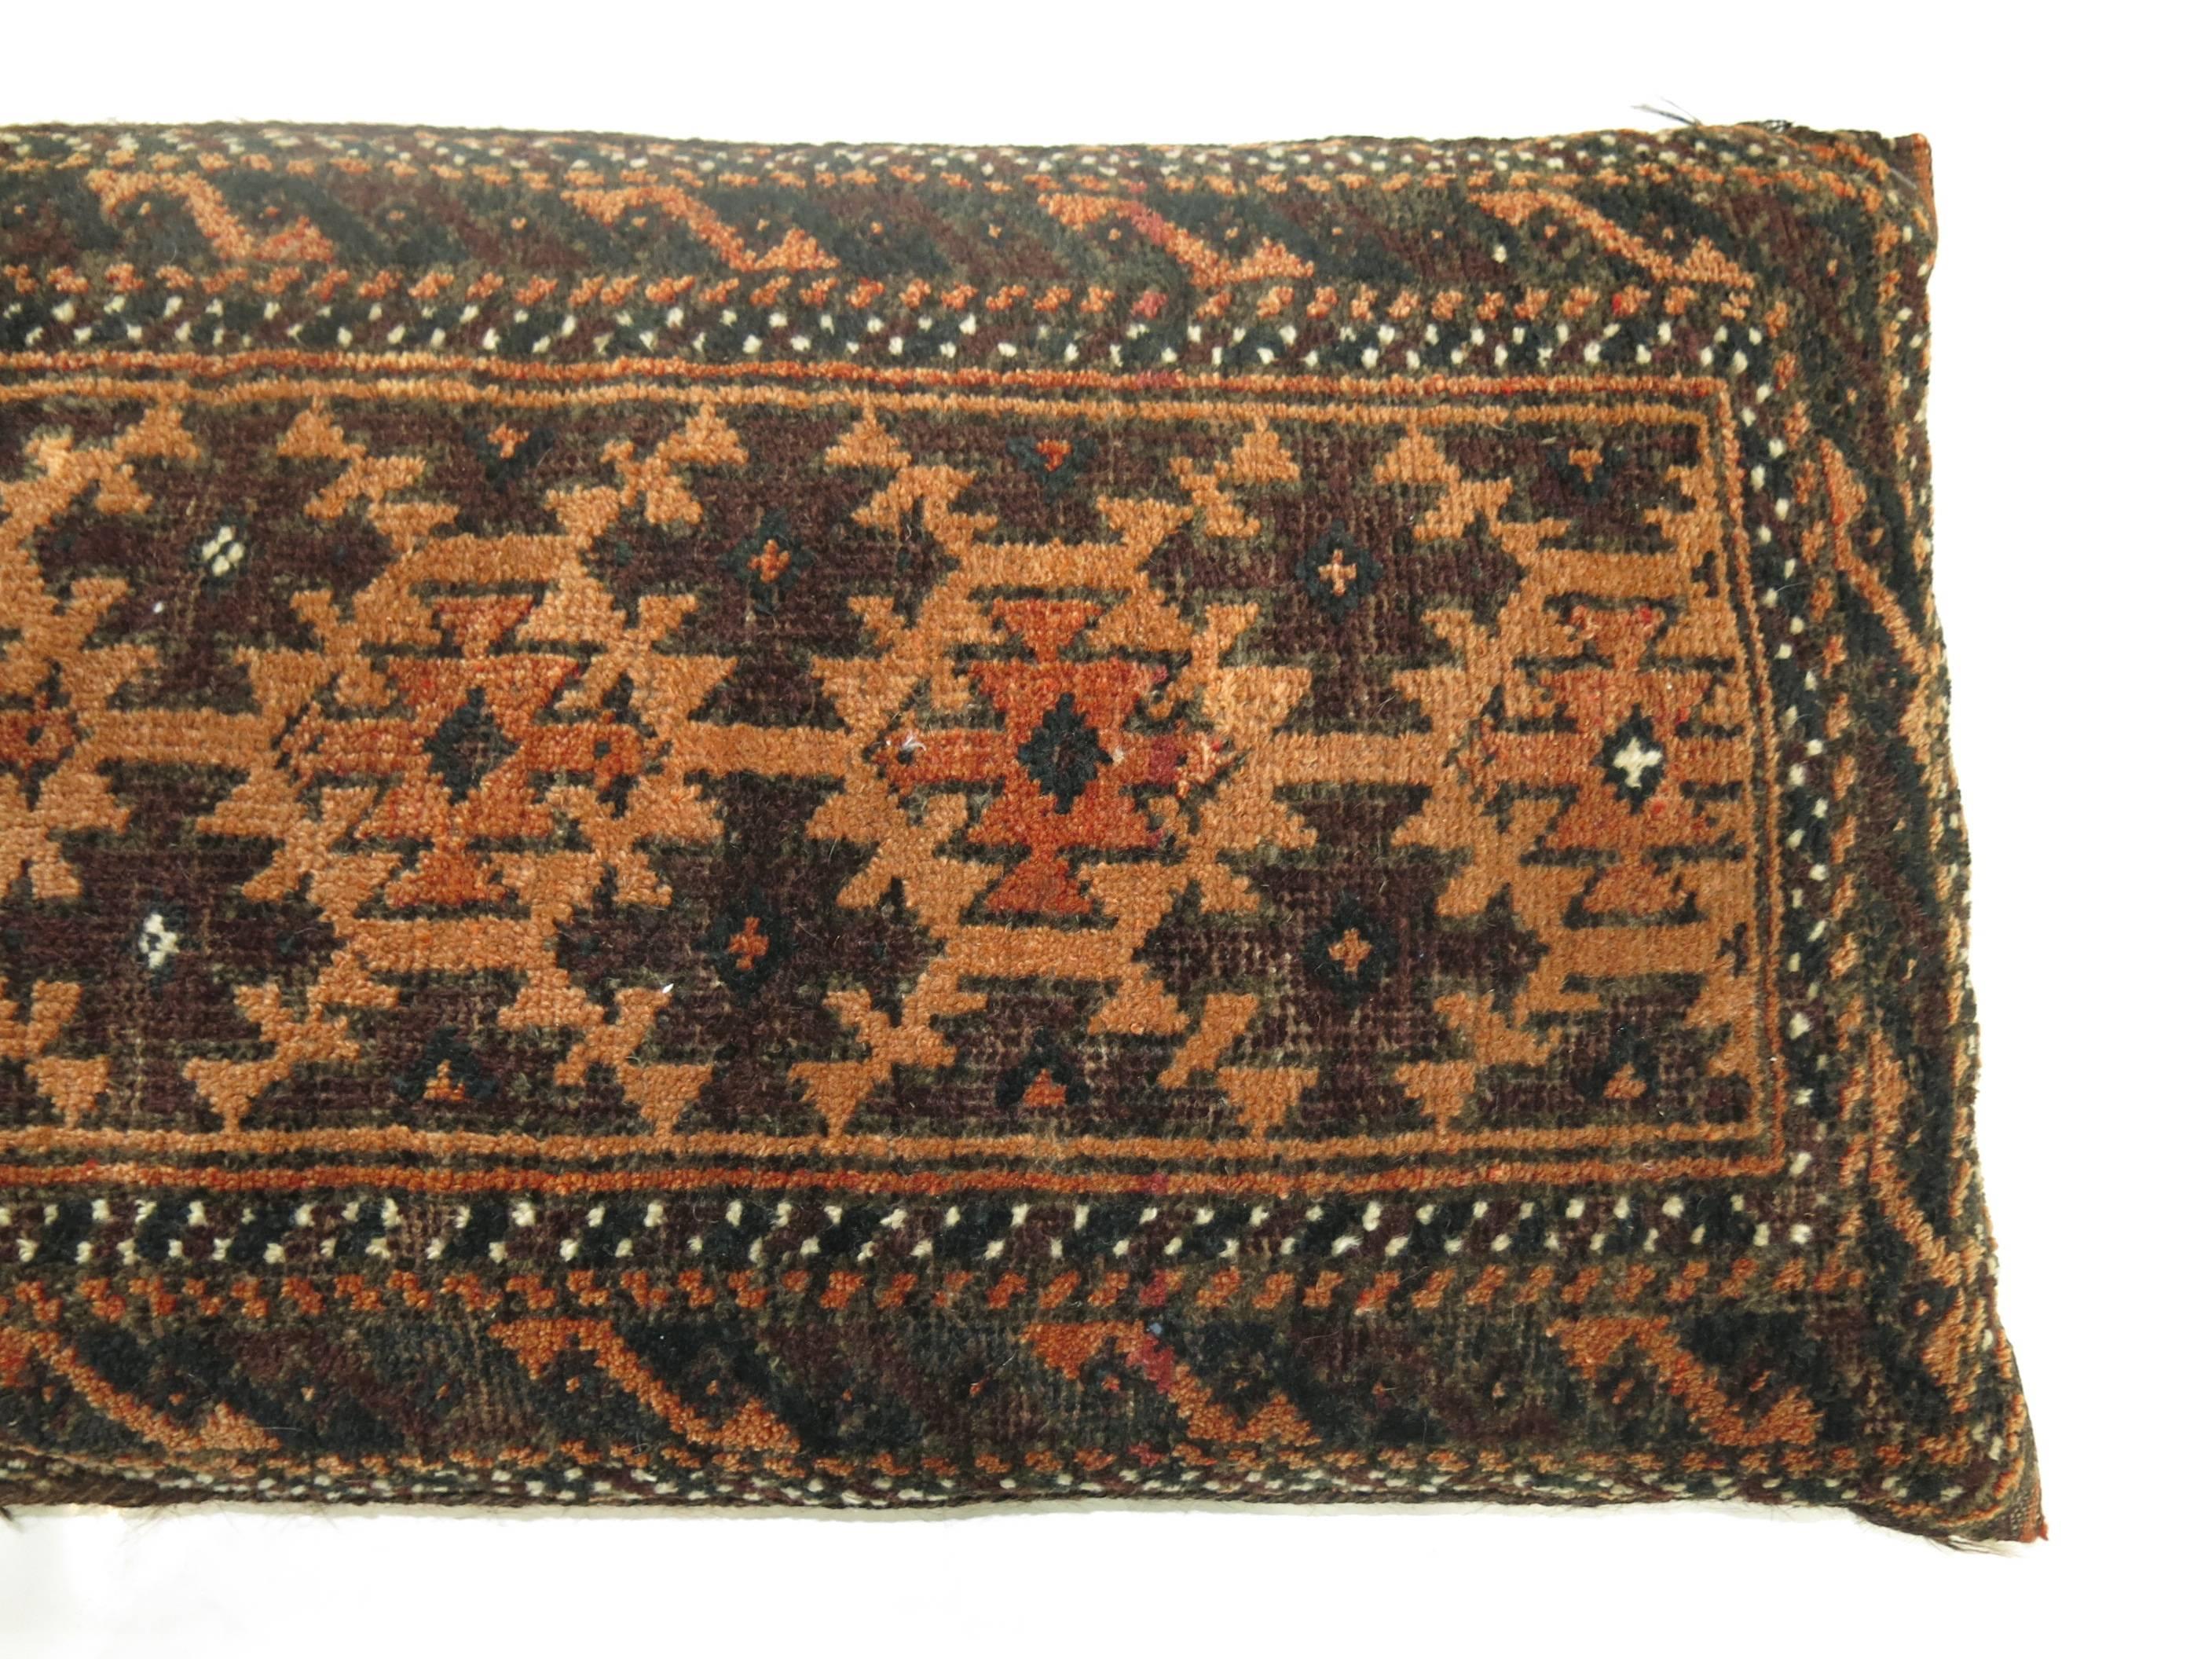 Large pillow made from a 19th century balouch rug with a rusty colored Kilim backing. Sewn shut.

16'' x 36''